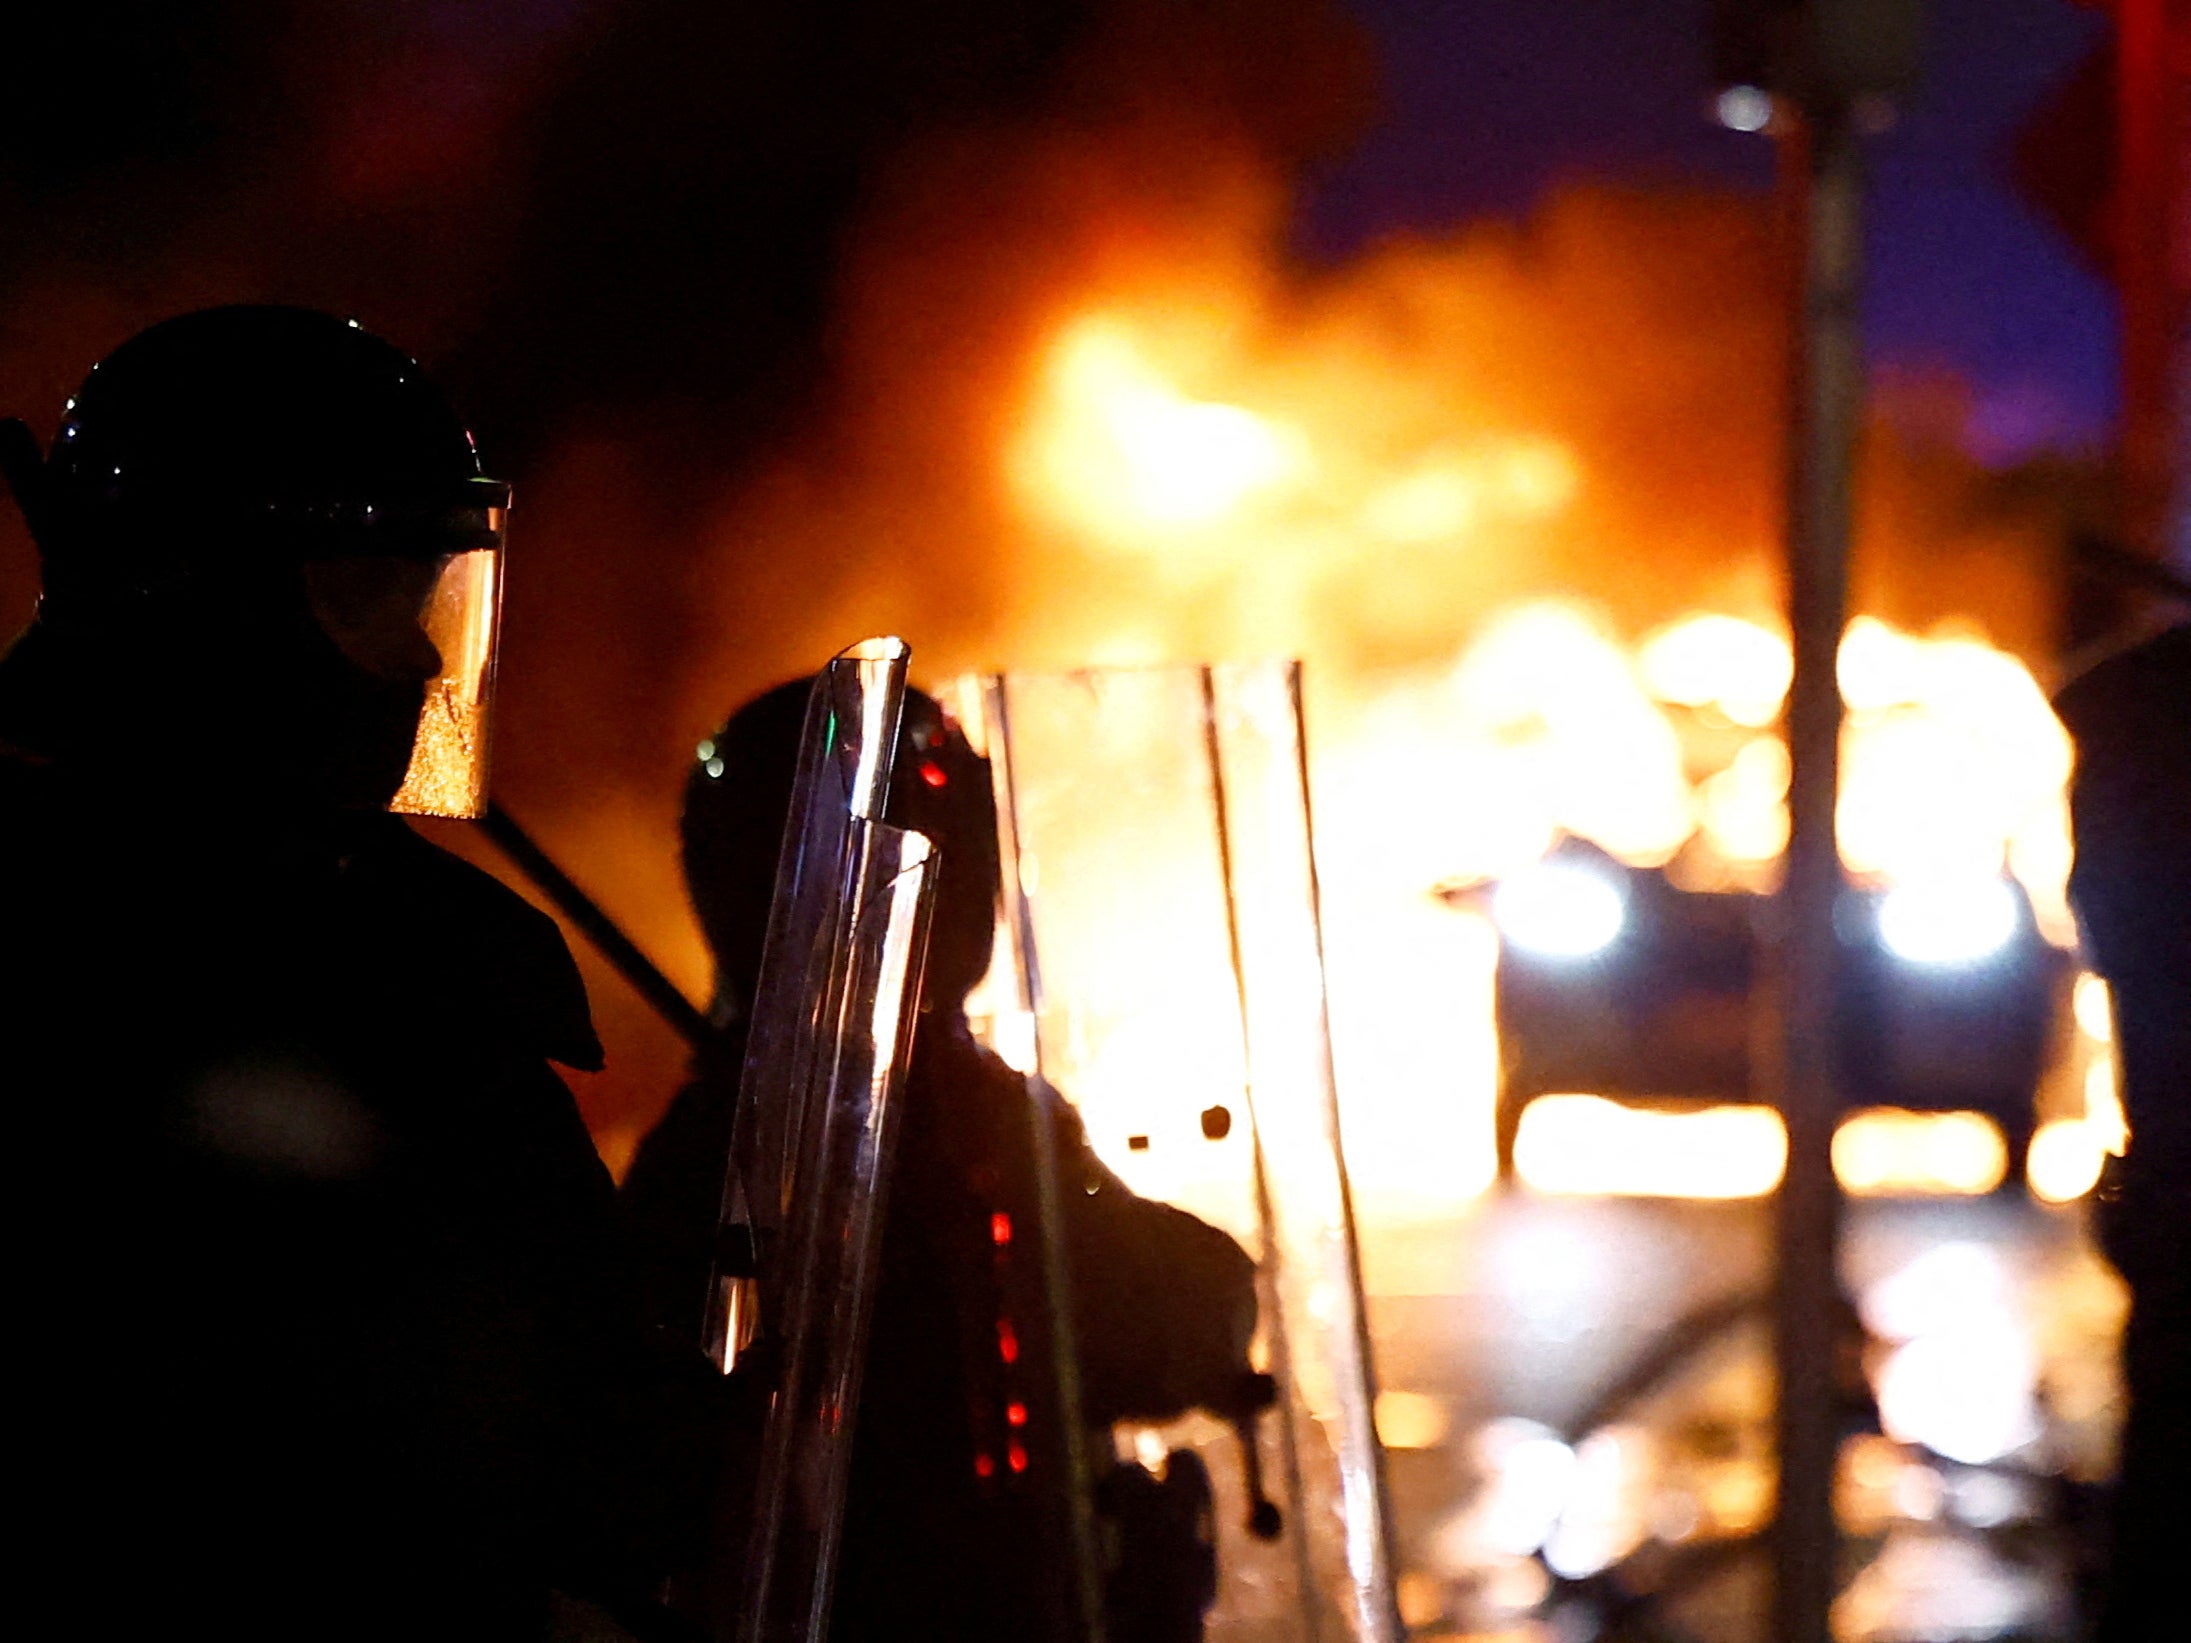 Riot police stand next to a burning police vehicle during a demonstration following a suspected stabbing that left children injured in Dublin, Ireland on Thursday